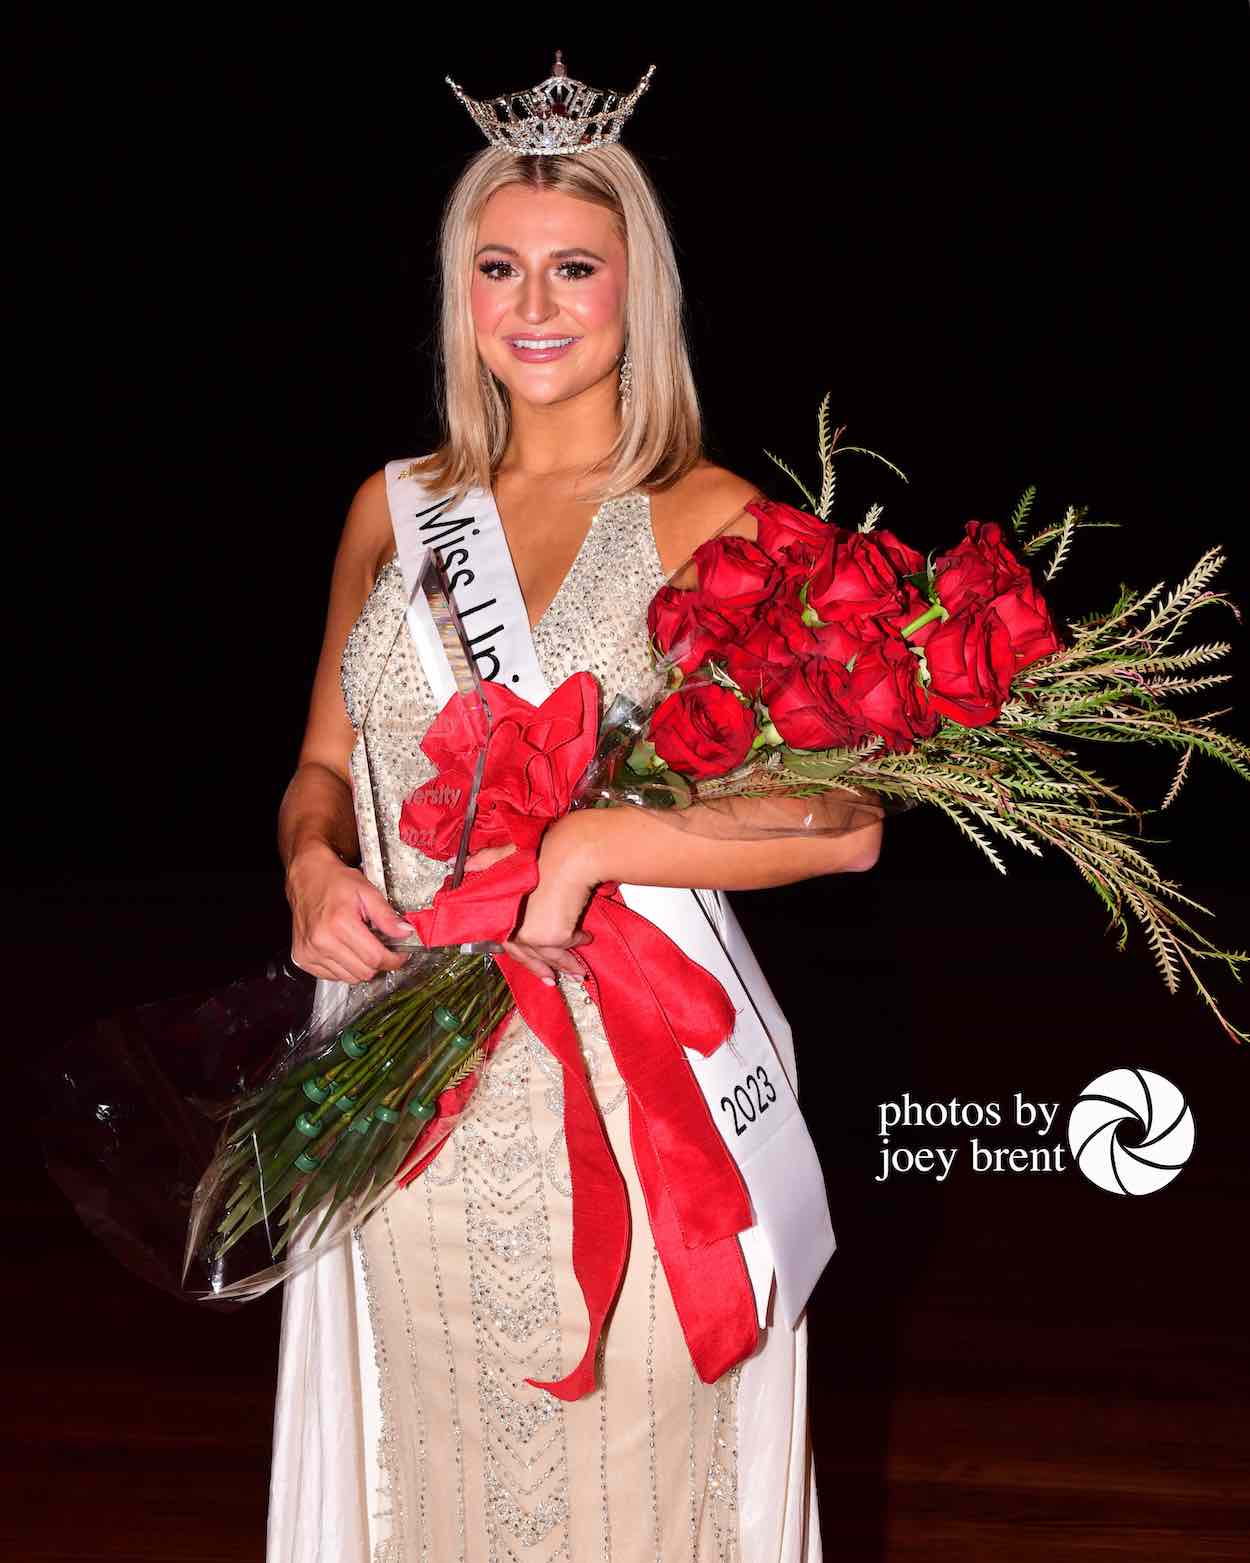 Allyson Hopper was chosen as Miss University and will compete in the Mississippi pageant in June. Submitted photo